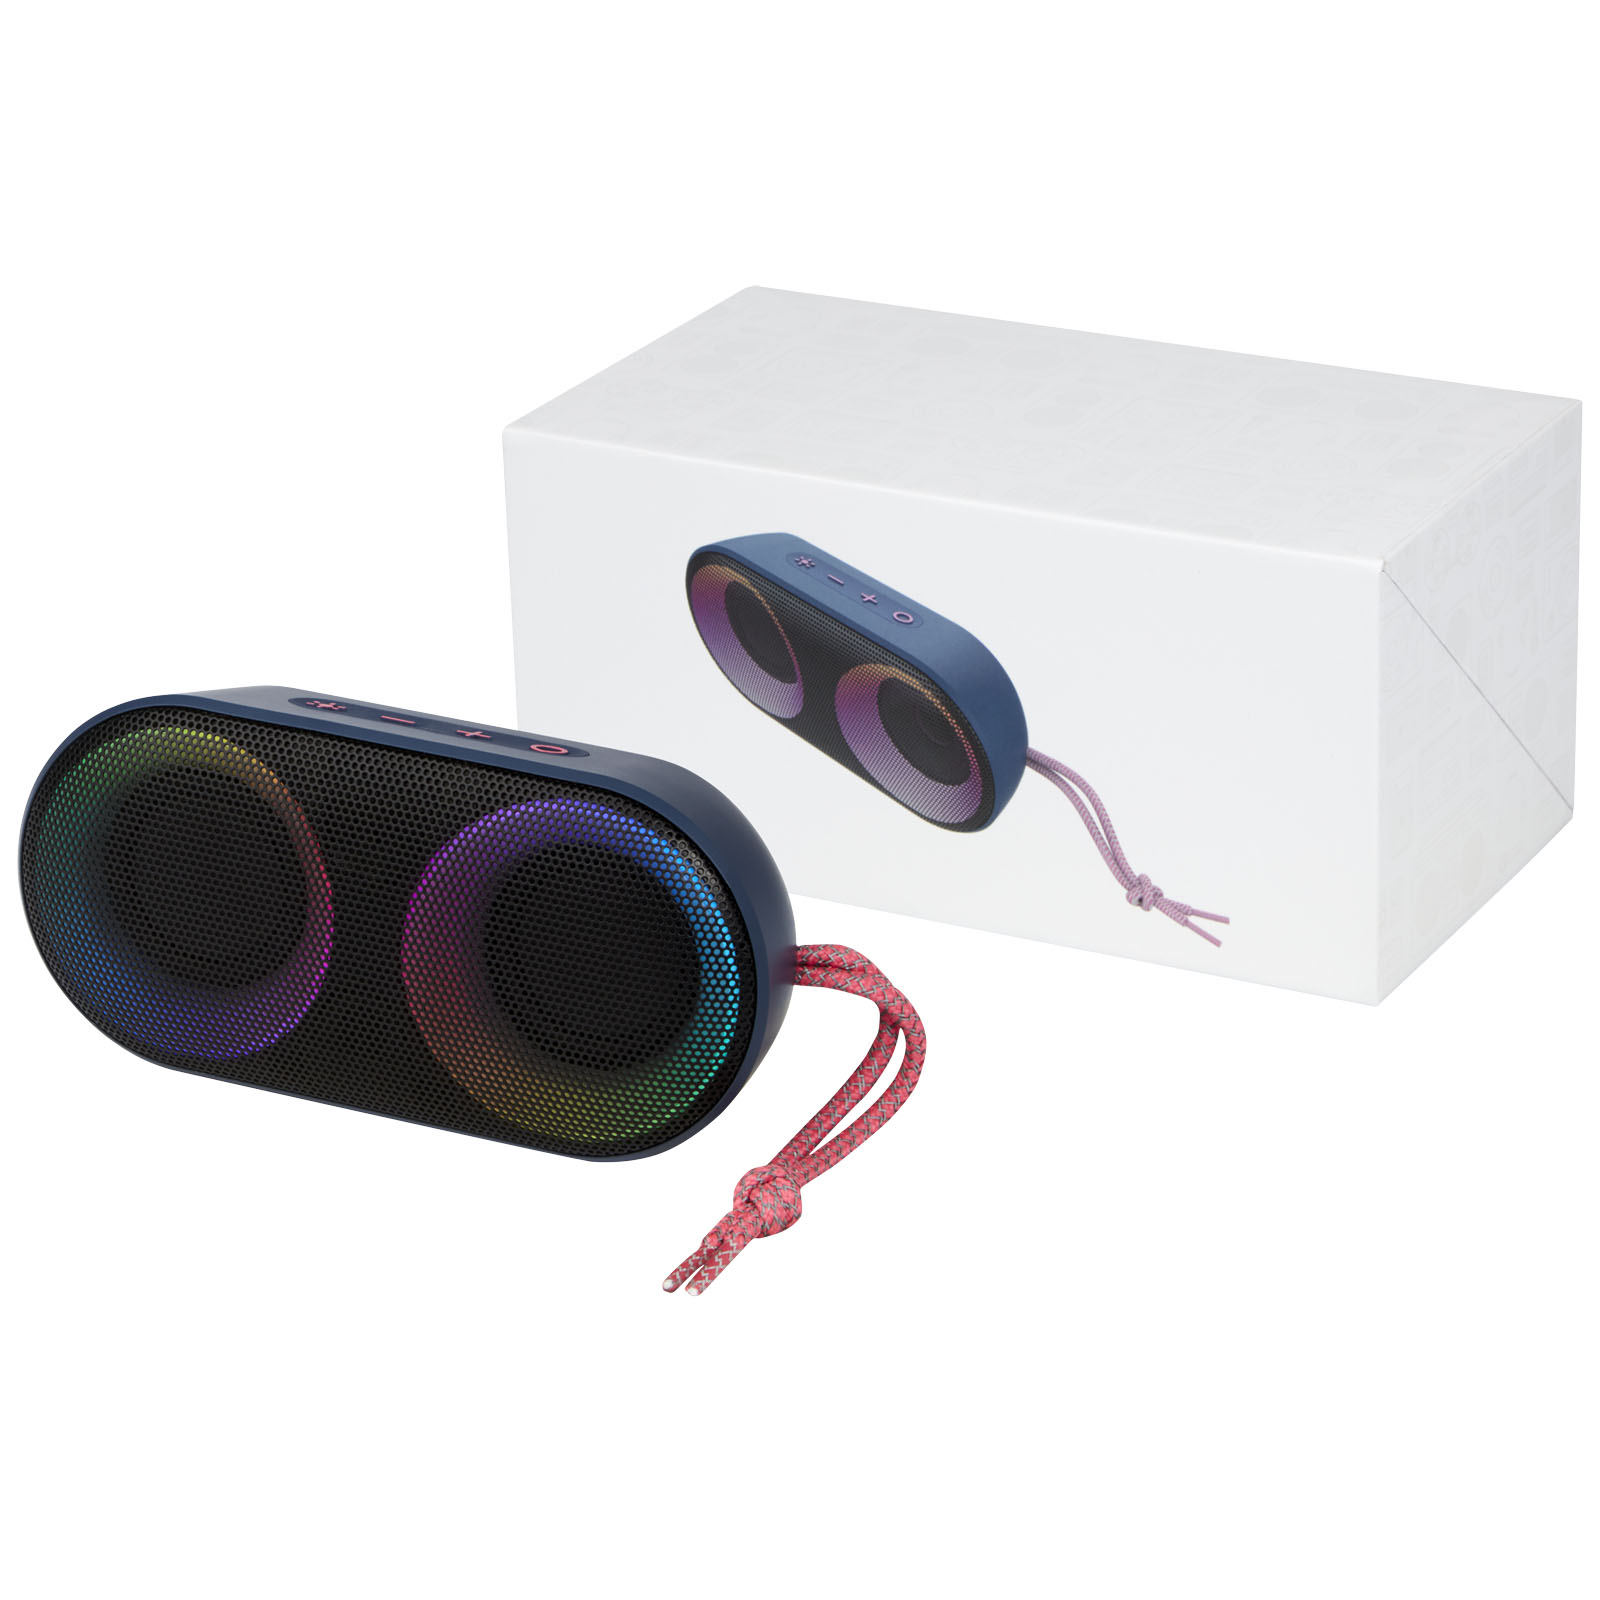 Speakers - Move MAX IPX6 outdoor speaker with RGB mood light